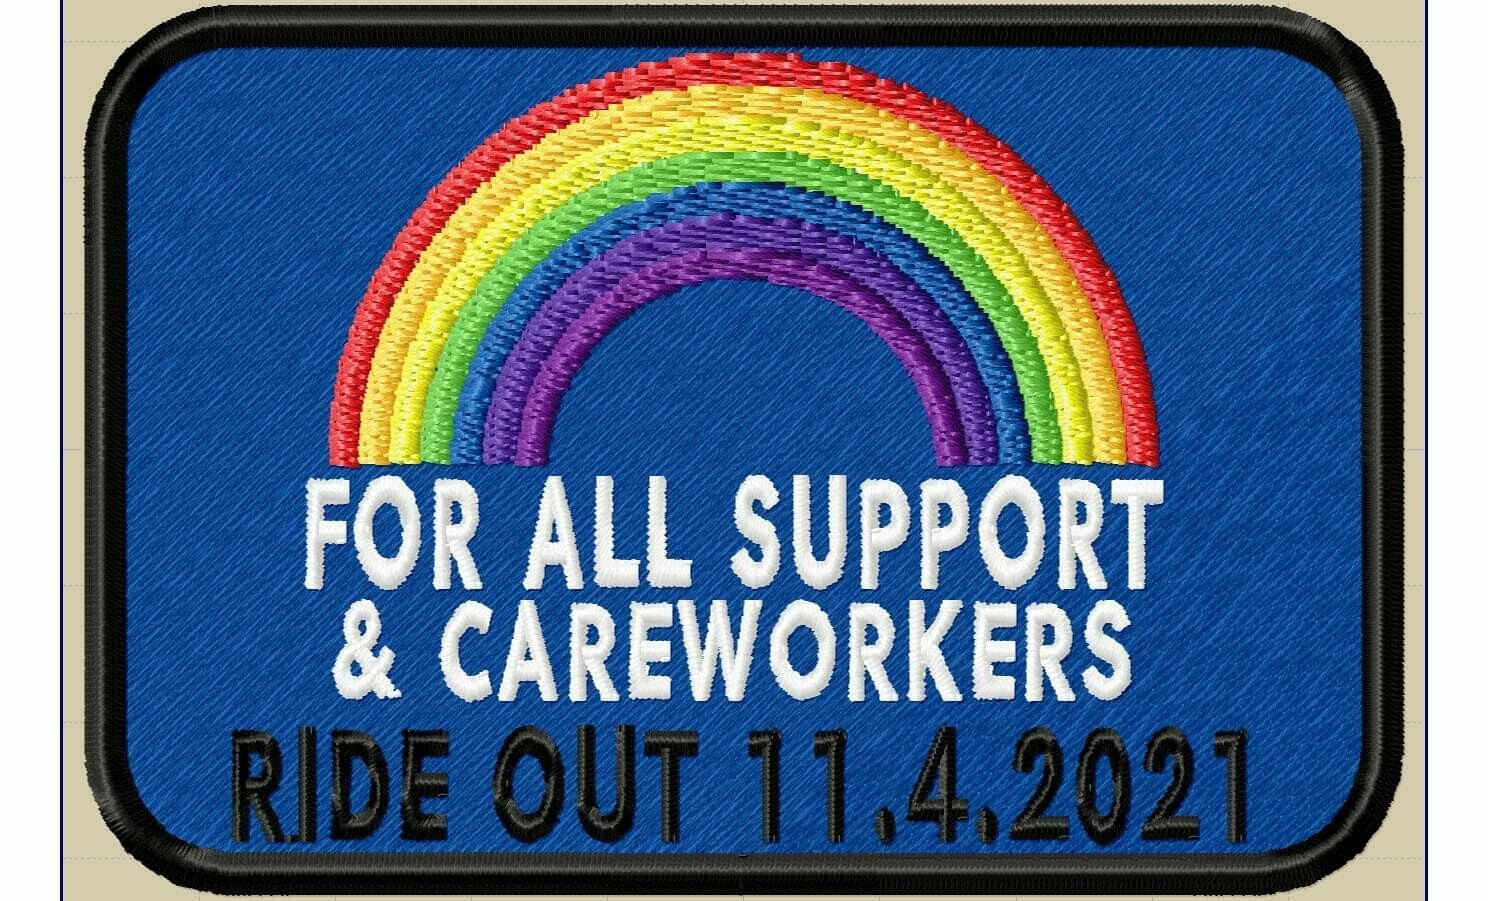 The NHS 'All Support & Careworkers' Ride Out 11/04/2021 Souvenir Patch Fundraising